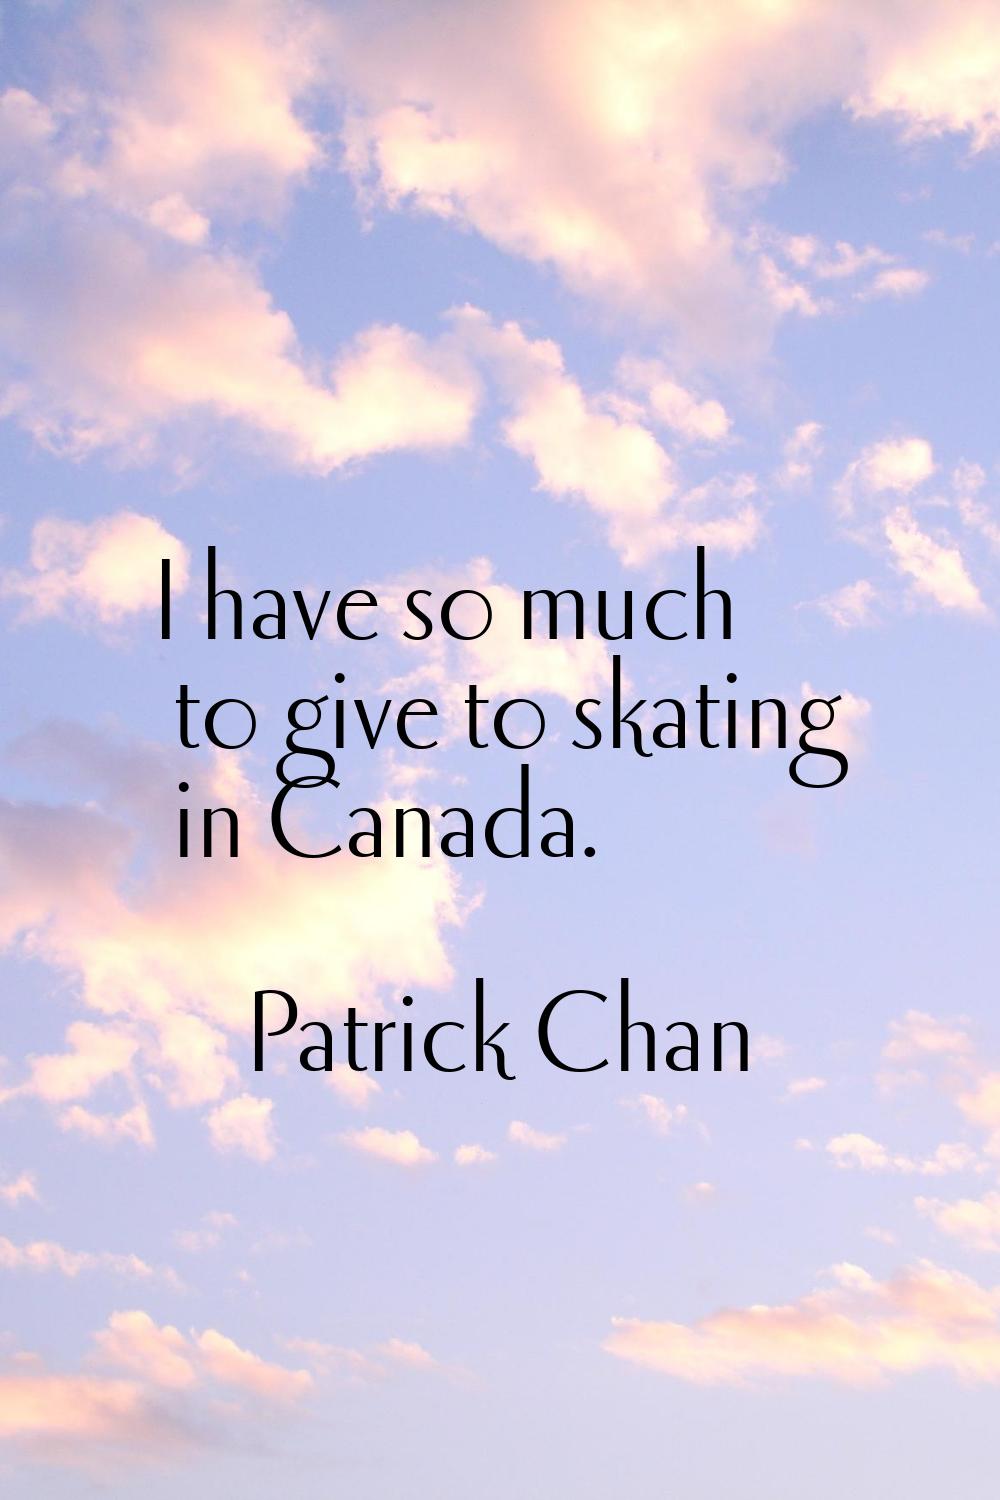 I have so much to give to skating in Canada.